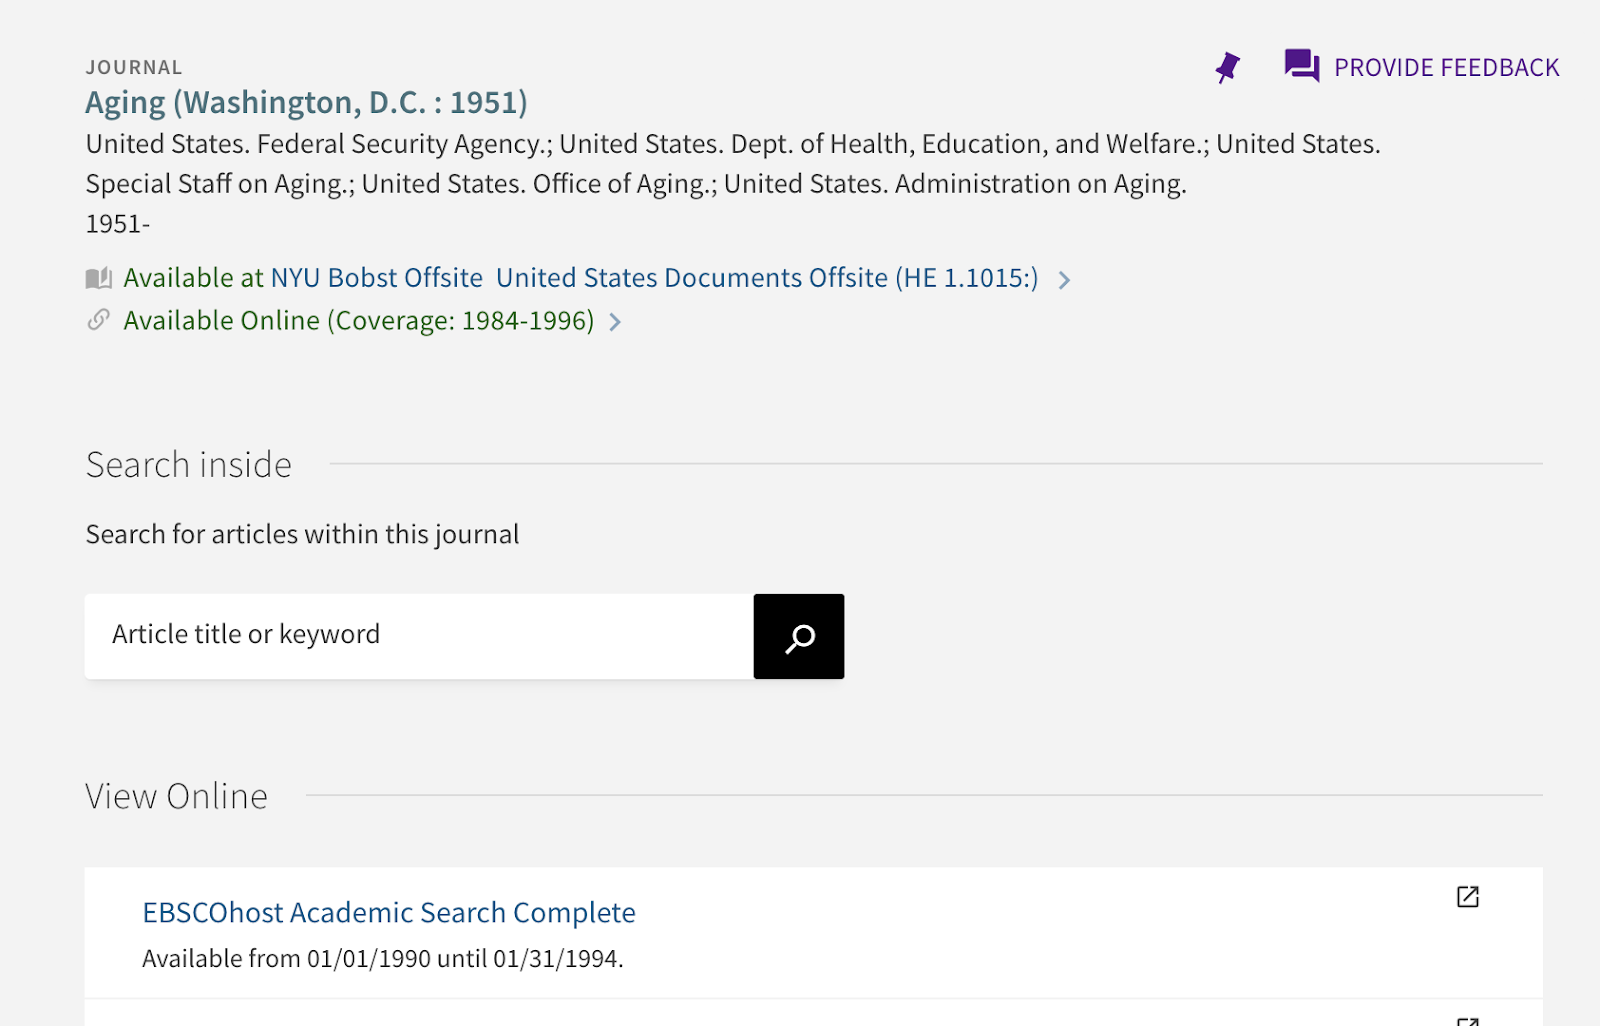 Full item display for the journal Aging, with the "Search inside" section's search bar prompt displaying "Article title or keyword".